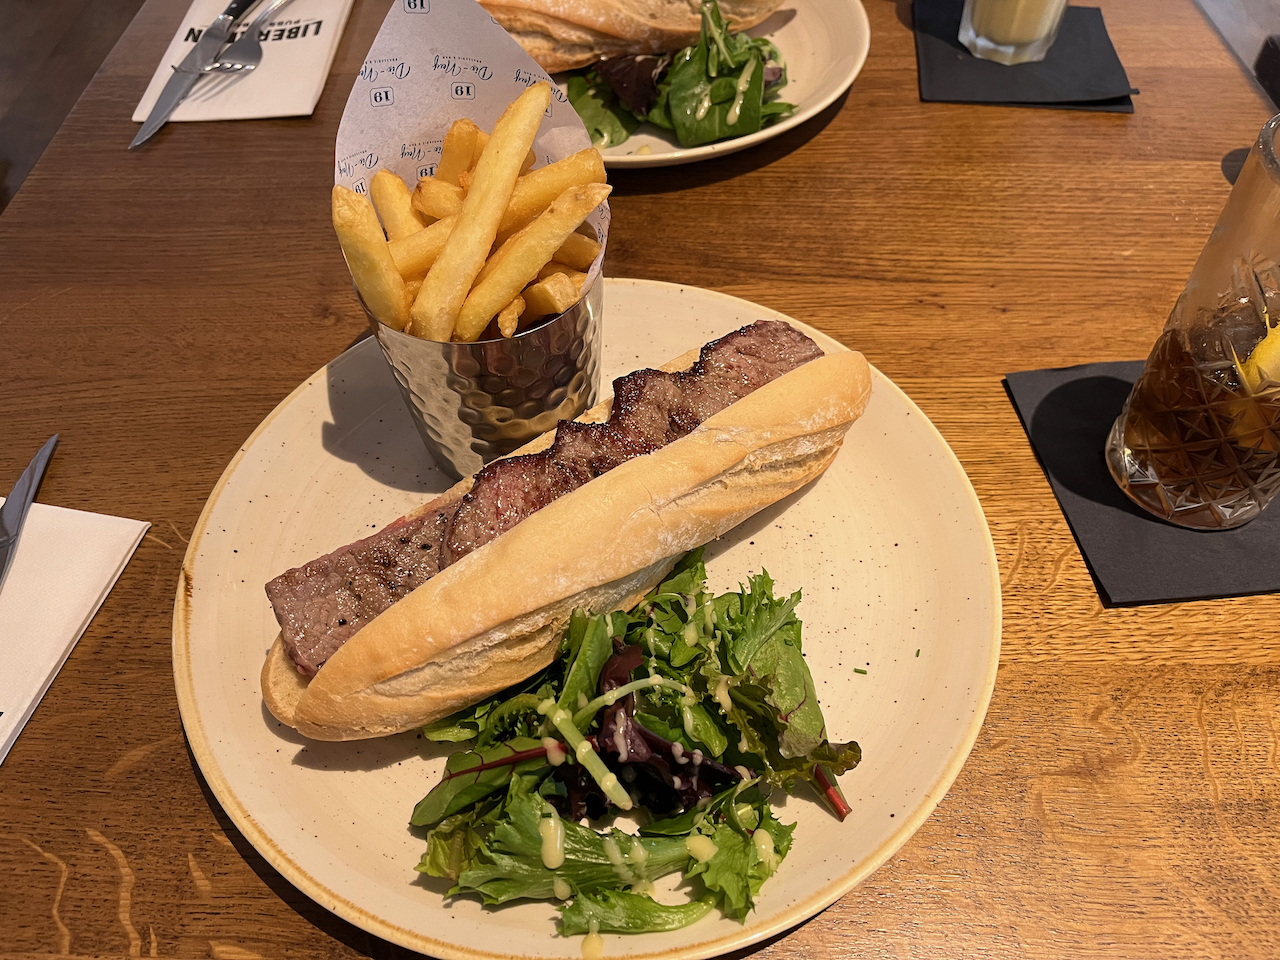 A large steak baguette with green salad leaves on a plate, along with a metal can containing lots of large chips.